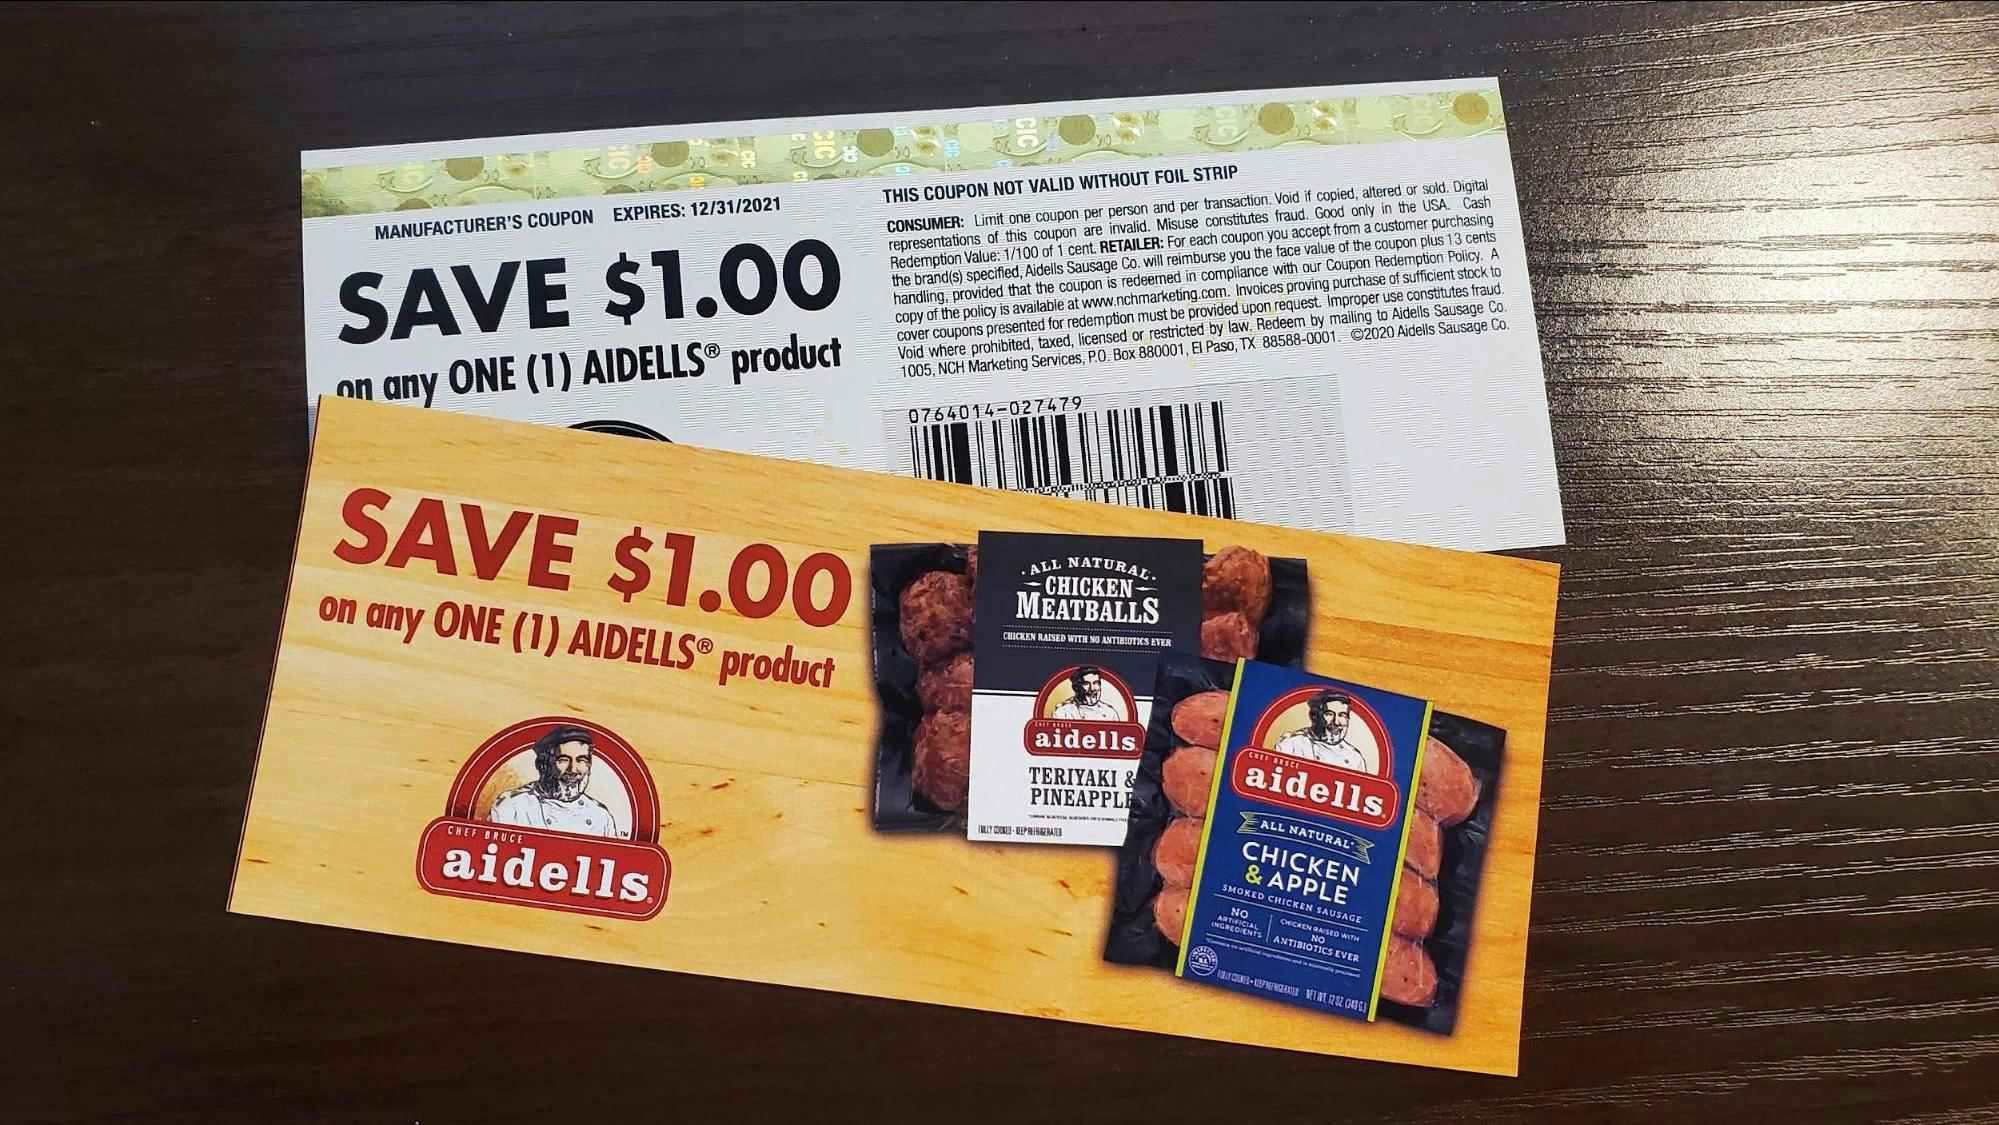 Free Aidells coupons by mail